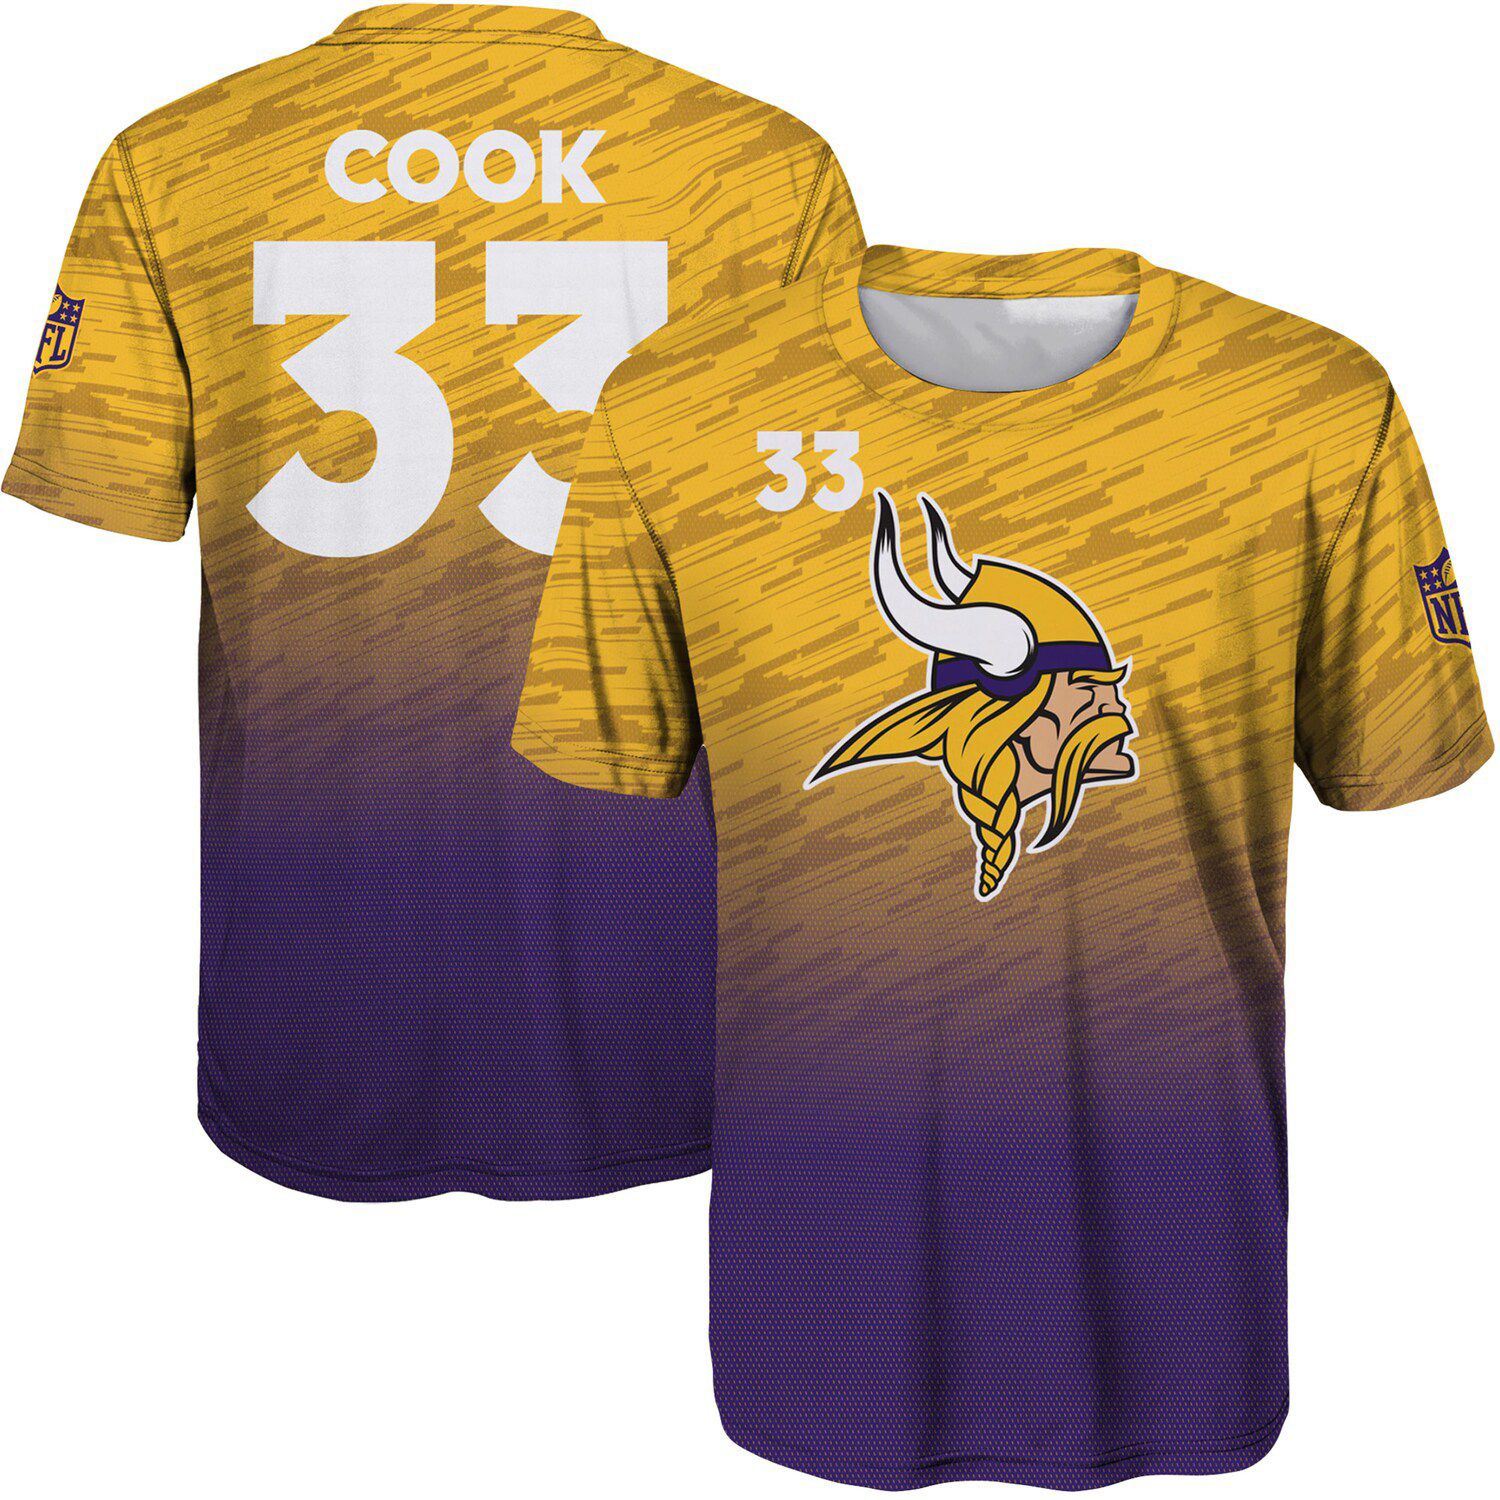 dalvin cook jersey youth